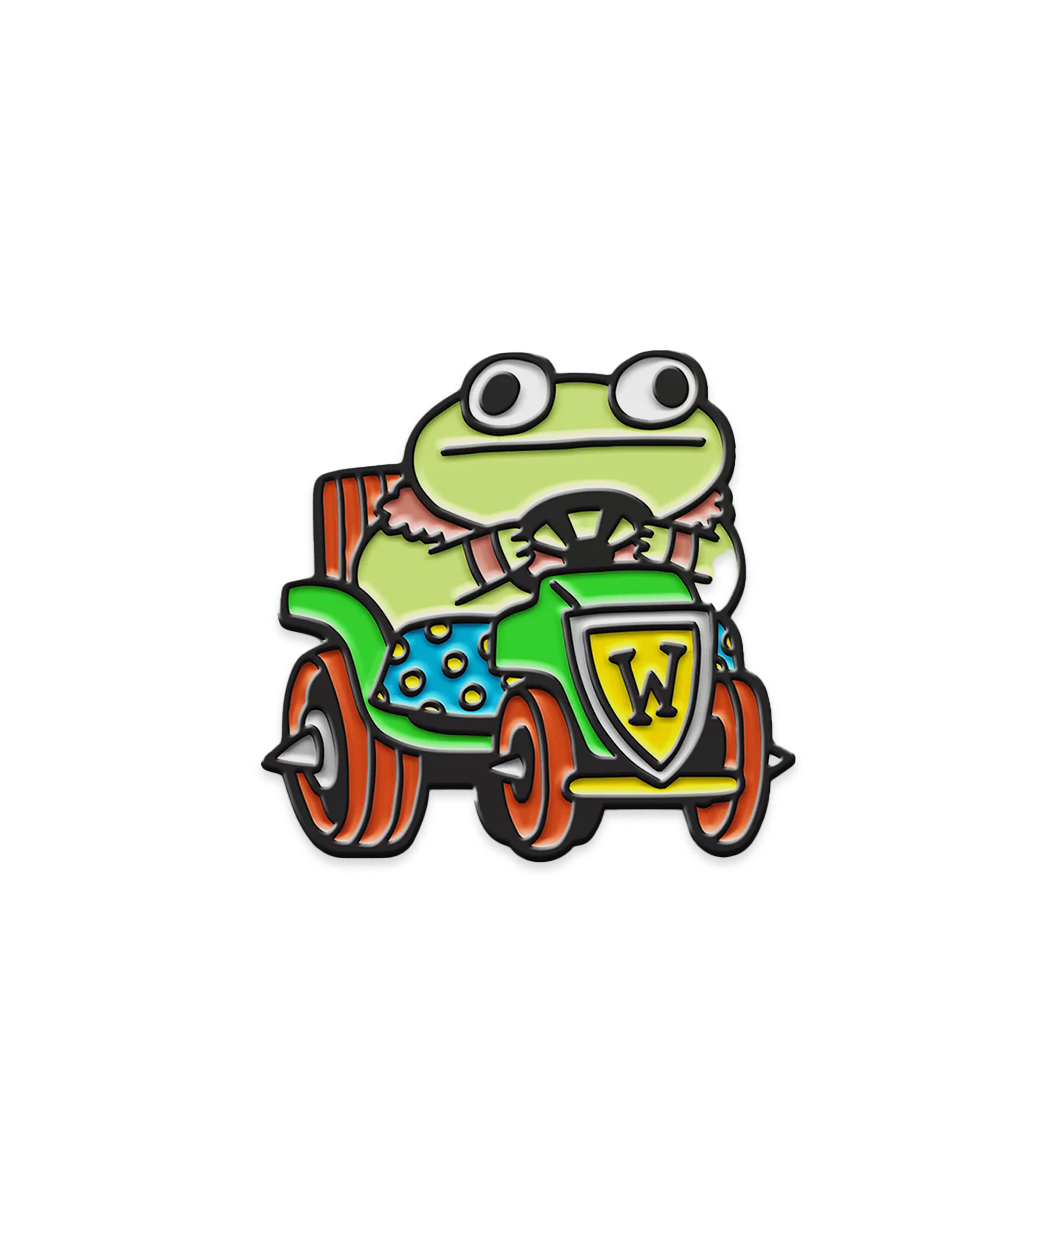 Black plated enamel pin of a frog driving a green go cart with red wheels. 